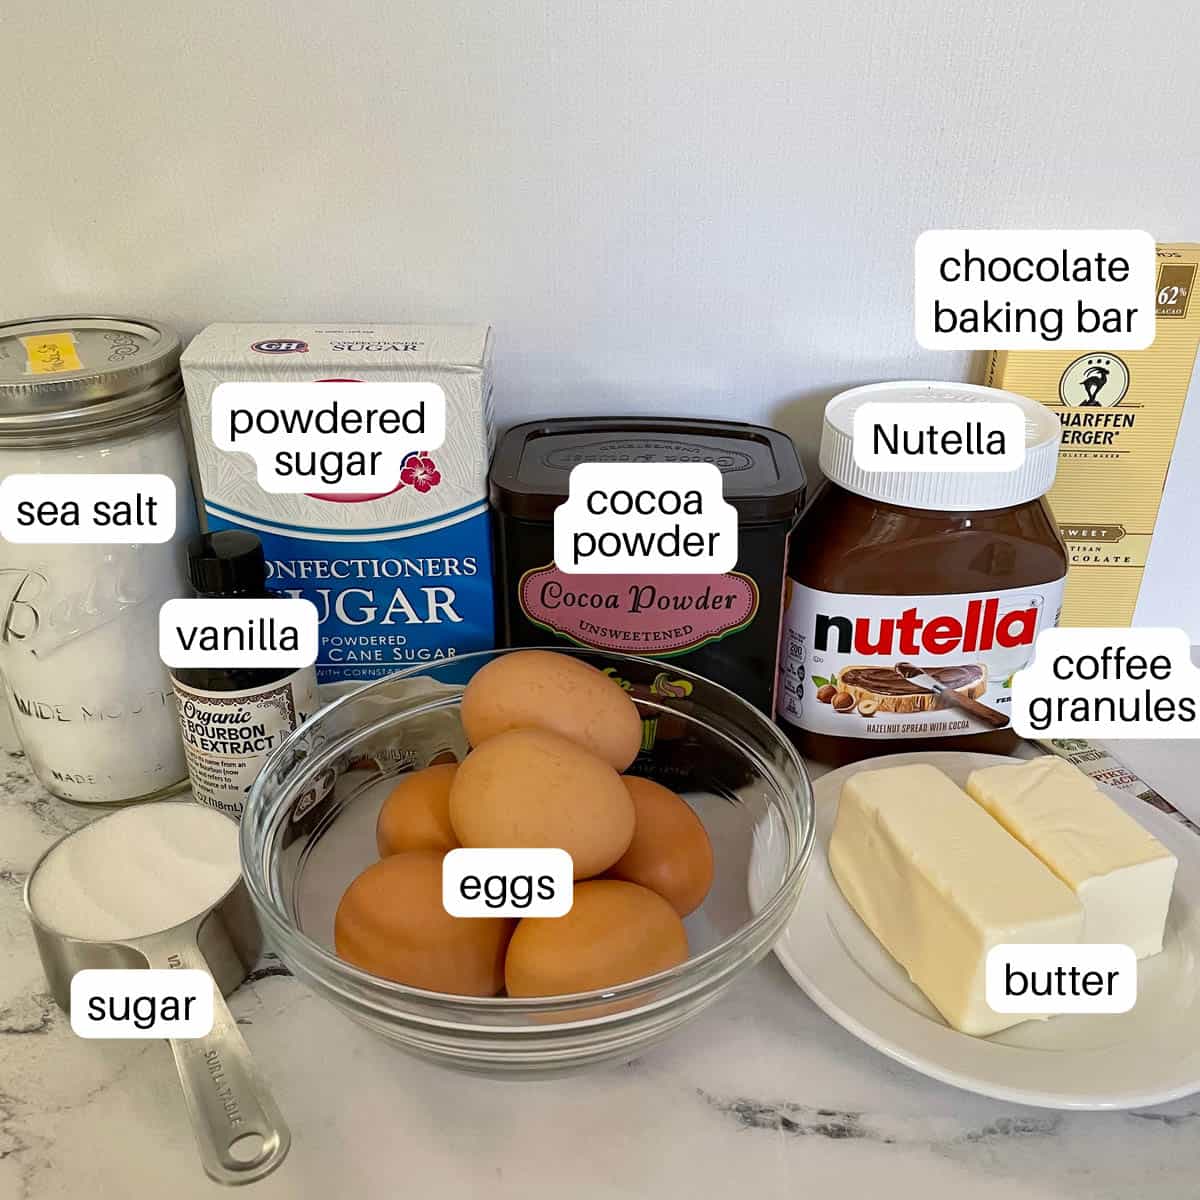 Ingredients for cake including sugar, eggs, butter, salt, vanilla, powdered sugar, cocoa, Nutella, coffee, and chocolate. 